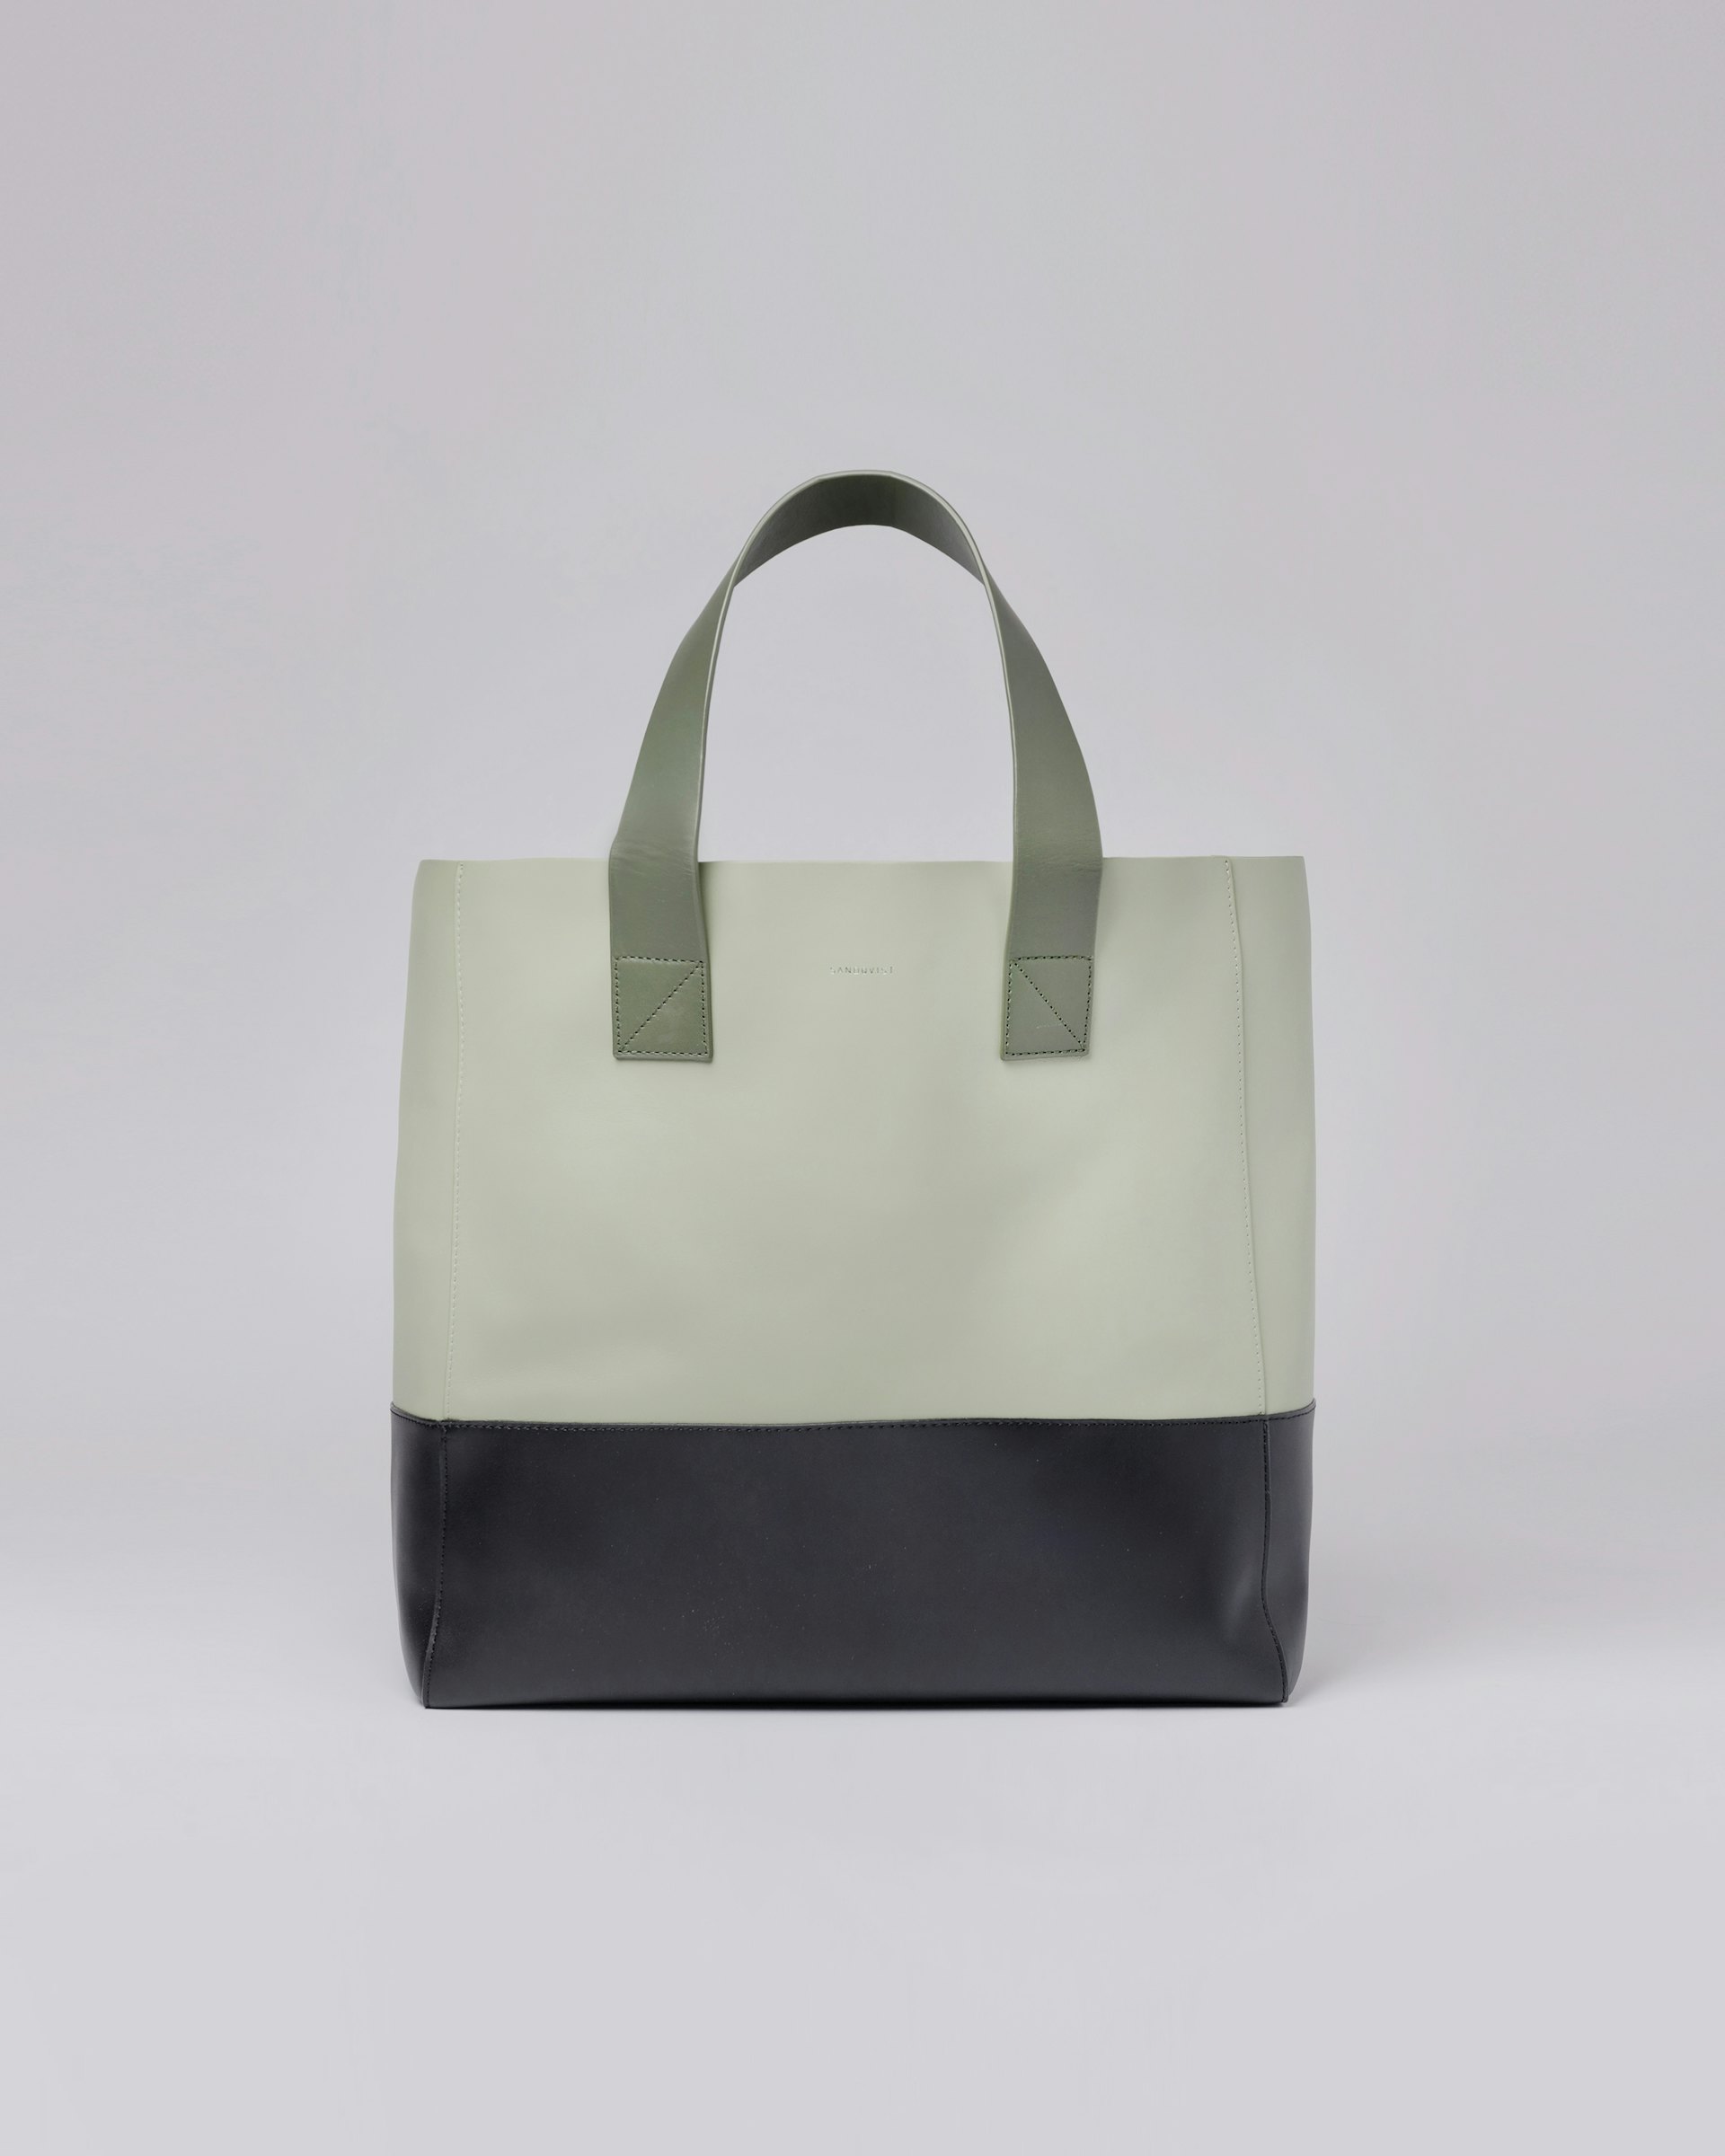 Iris belongs to the category Shoulder bags and is in color green & green (1 of 4)